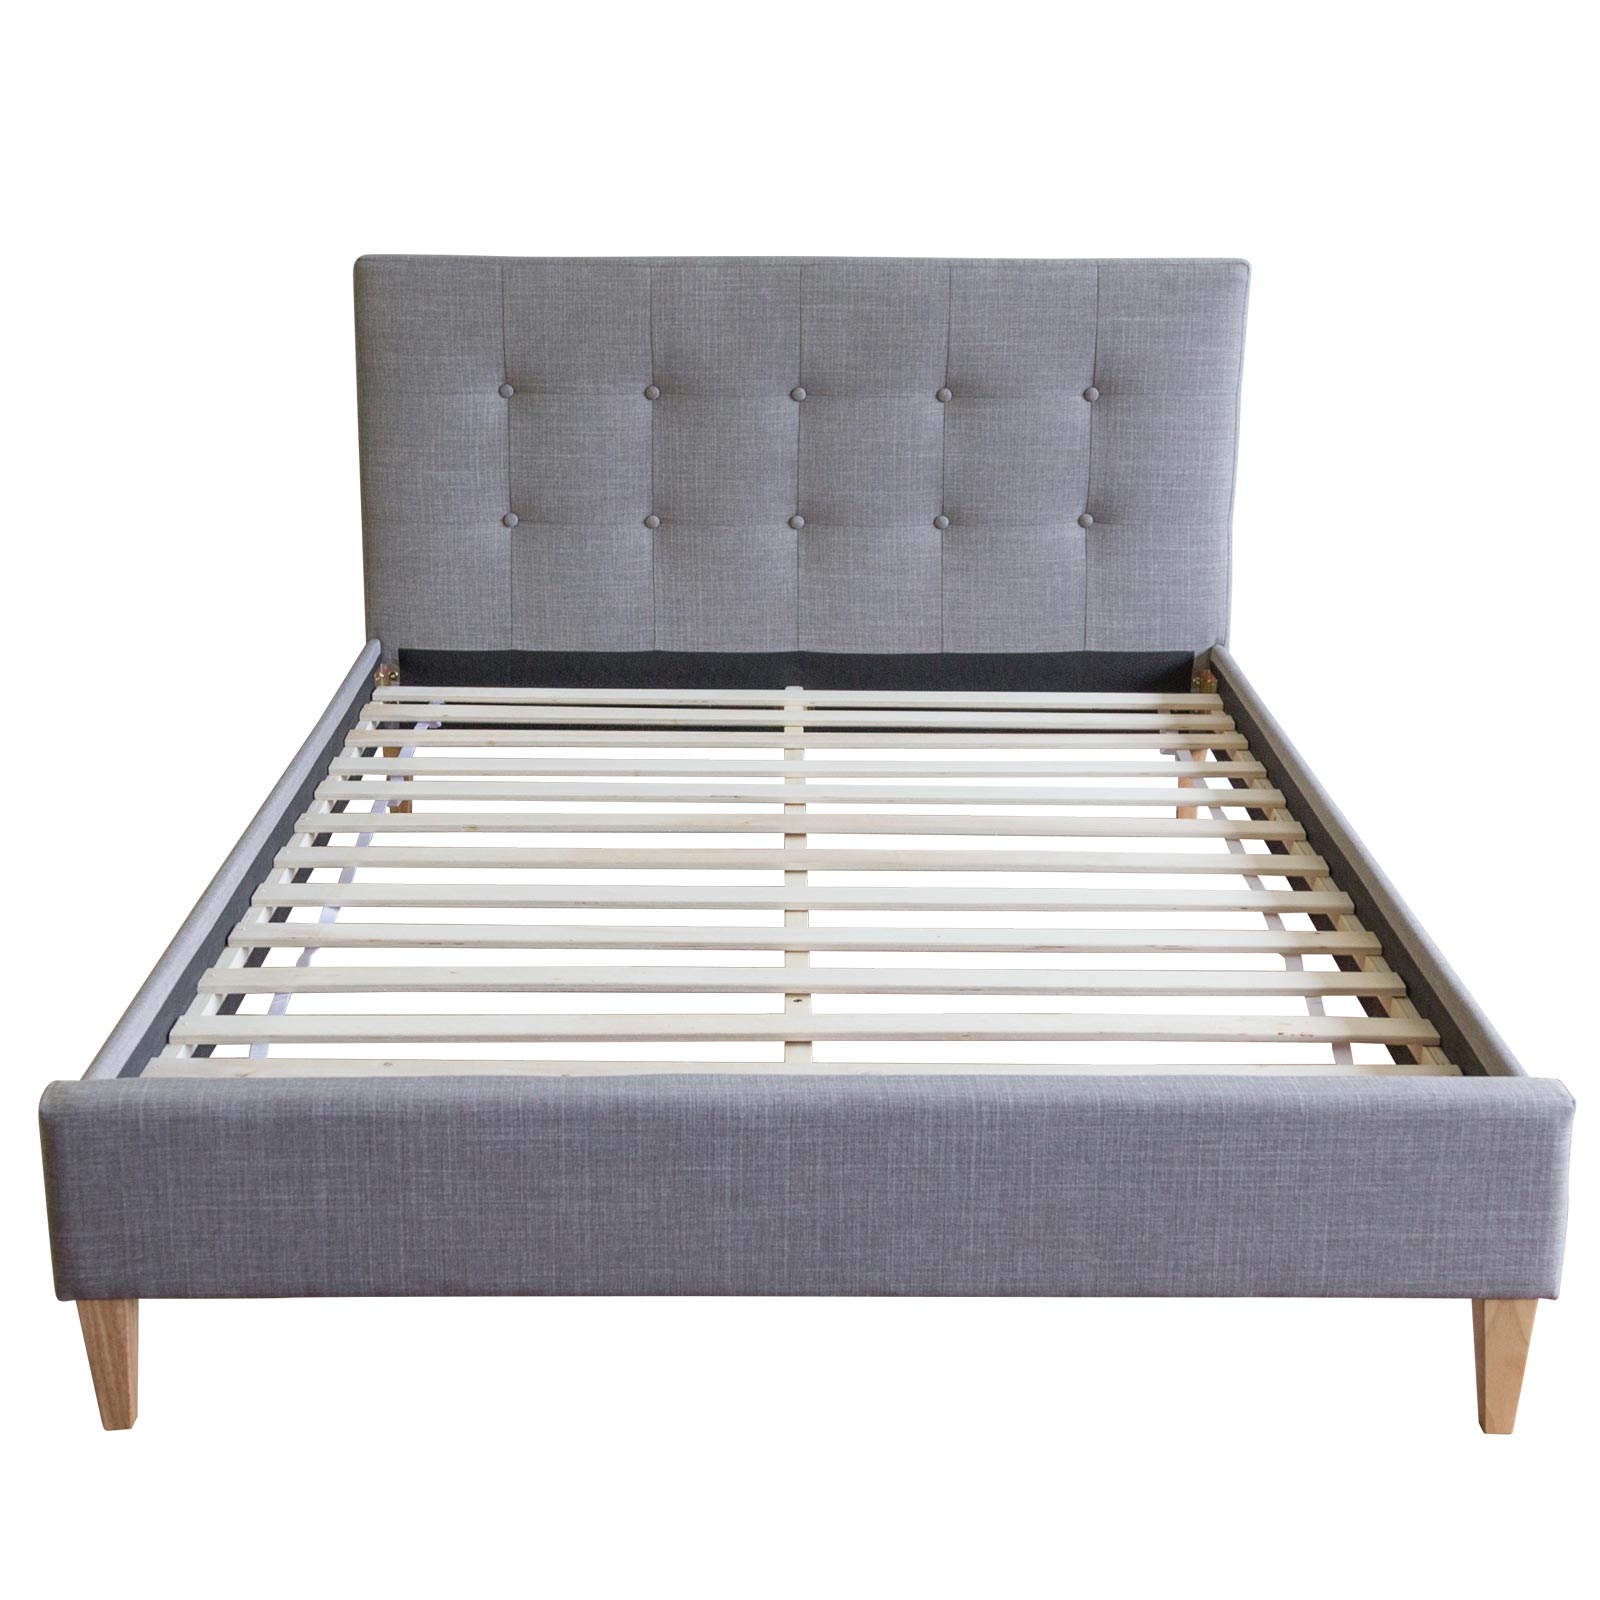 Upholstered Bed with Mattress 140x200 Slatted Frame Double Bed Fabric Bedstead Bed Grey